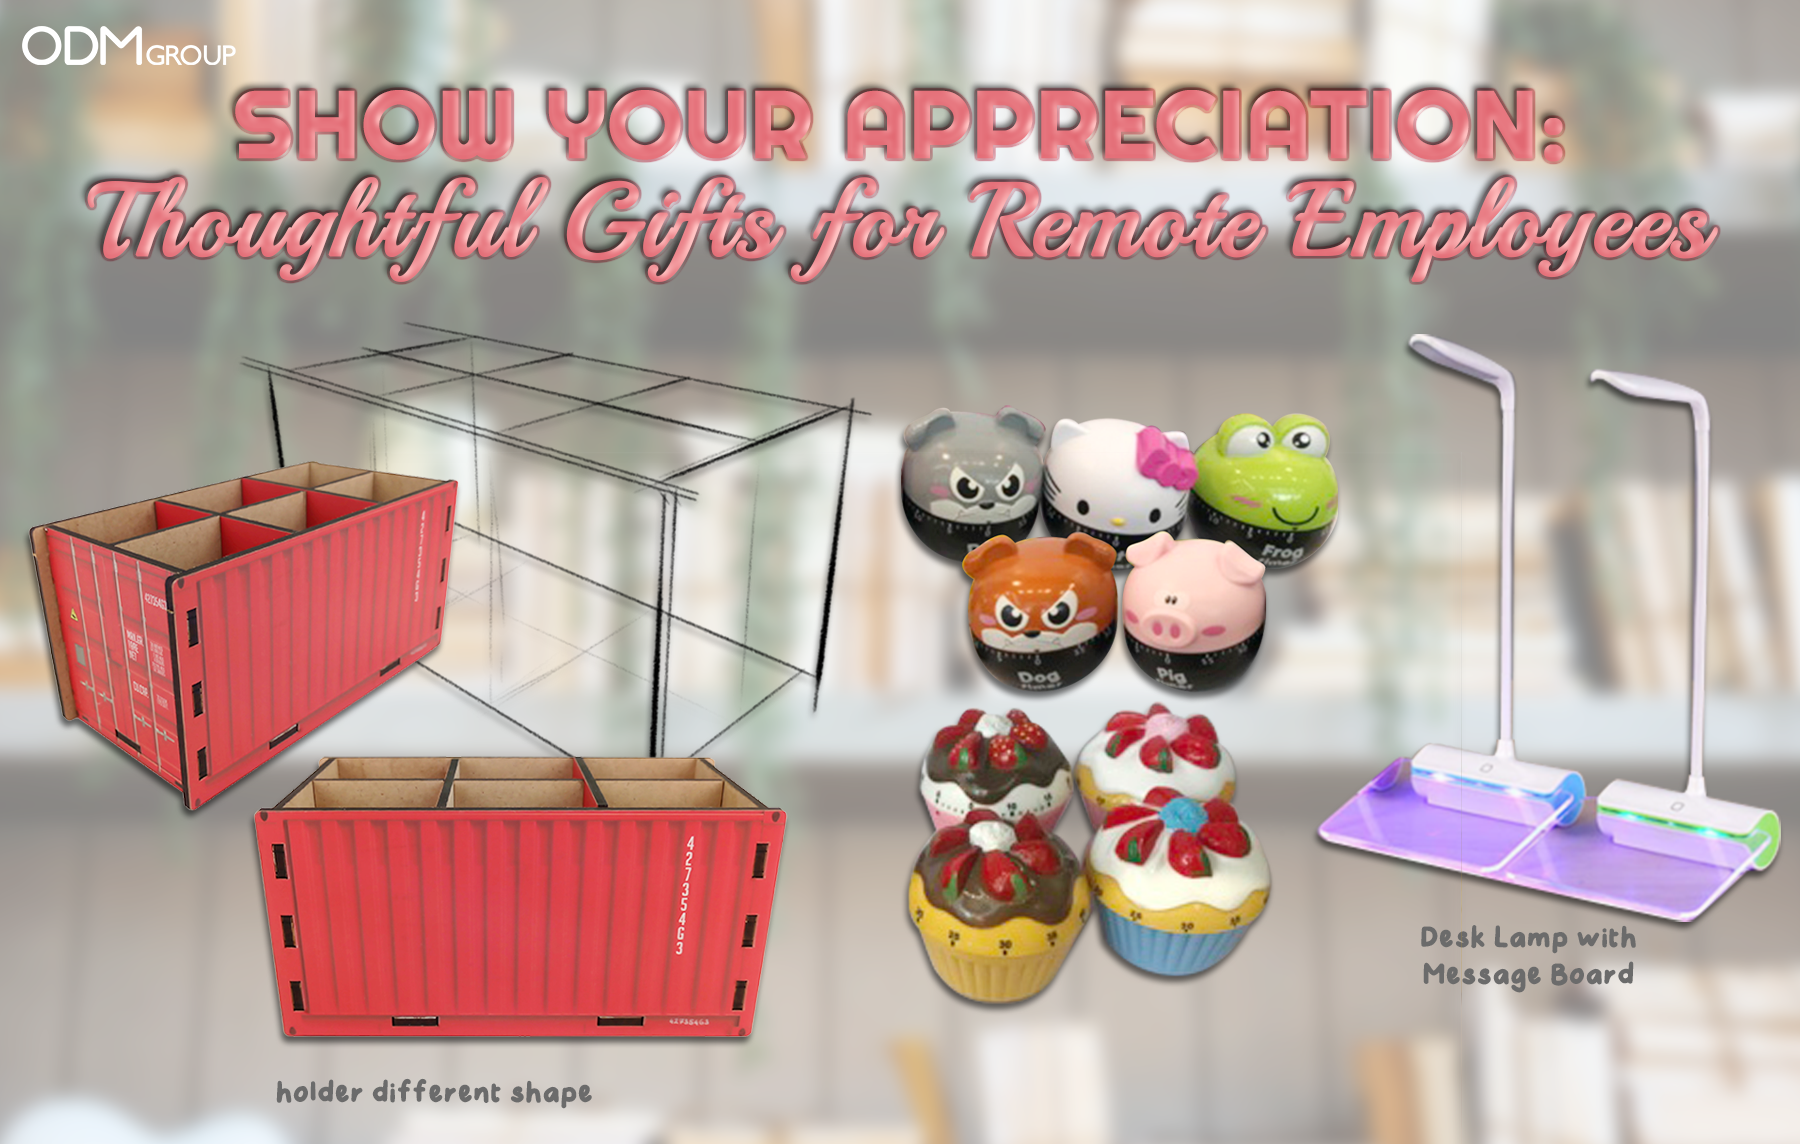 Thoughtful gifts for remote employees including a desk lamp, animal-shaped holders, and cupcake containers by ODM Group.